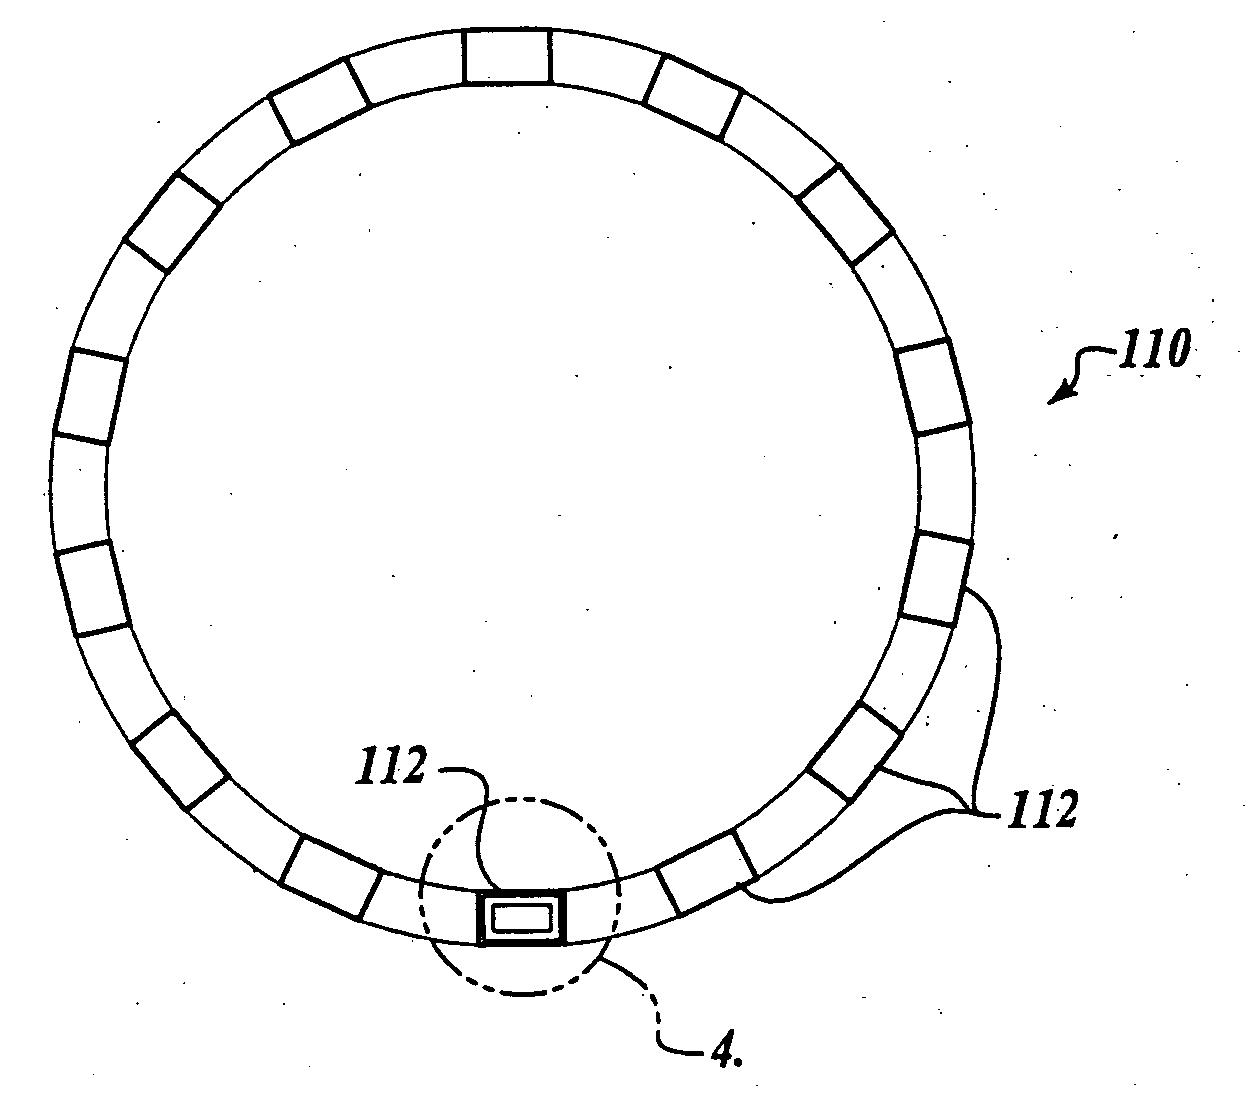 Medical device having radio-opacification and barrier layers